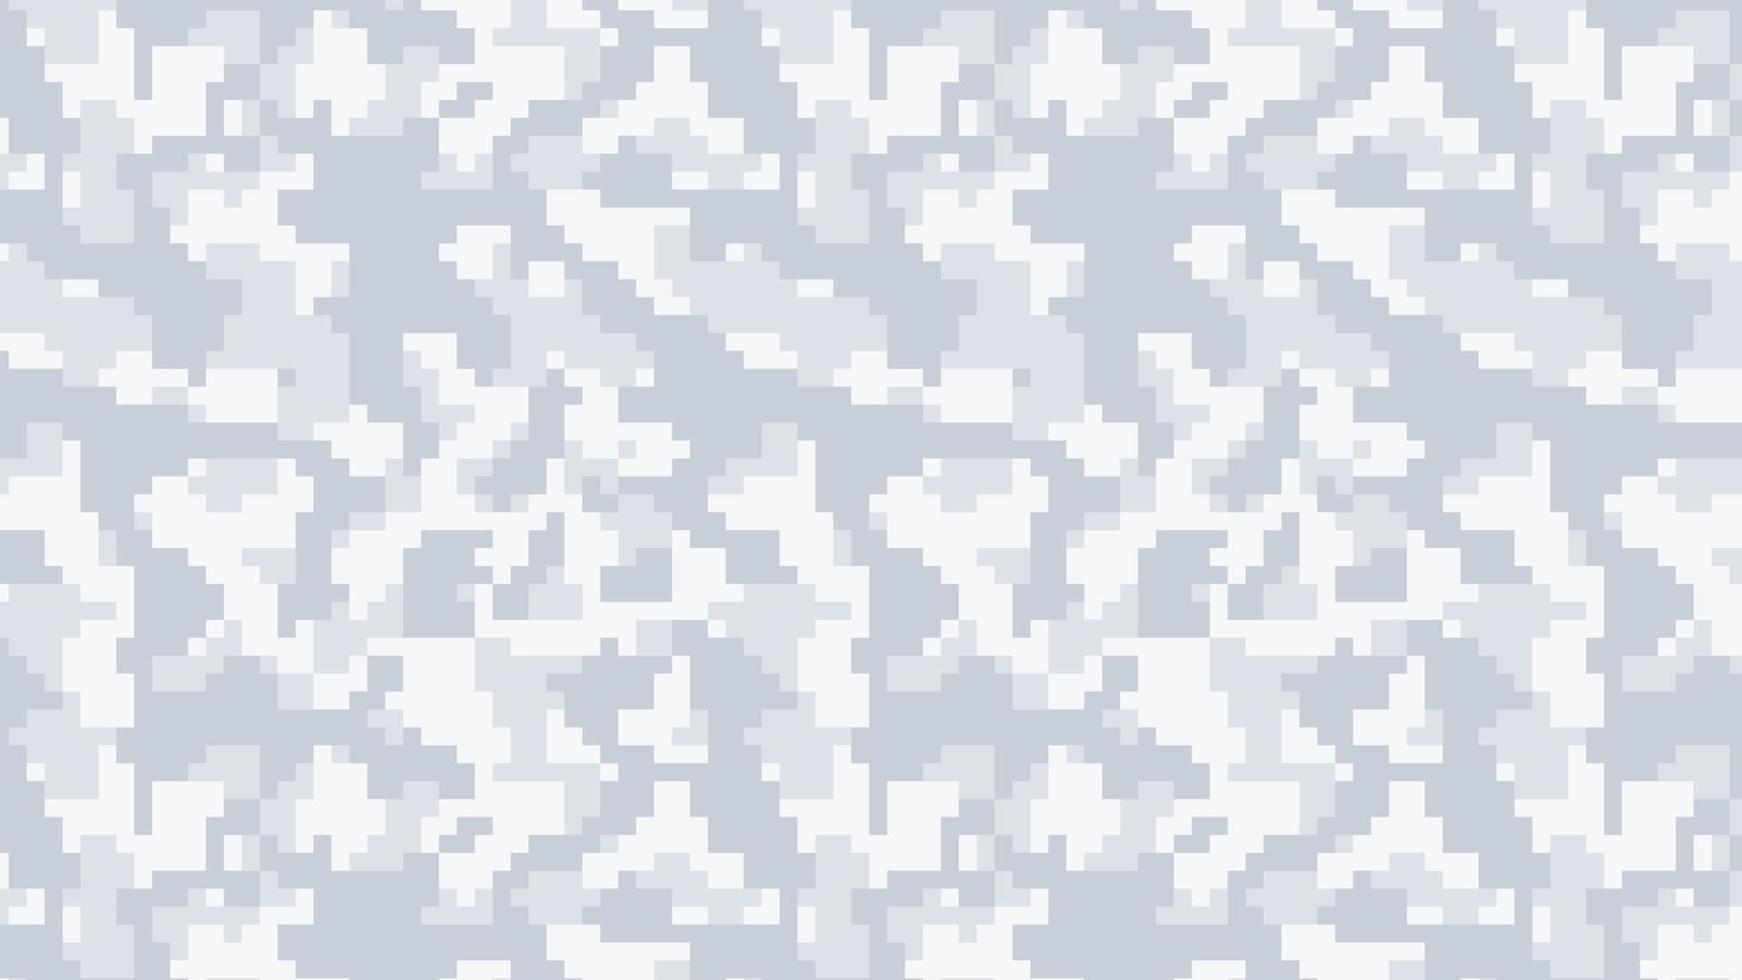 Military and army pixel camouflage pattern background vector